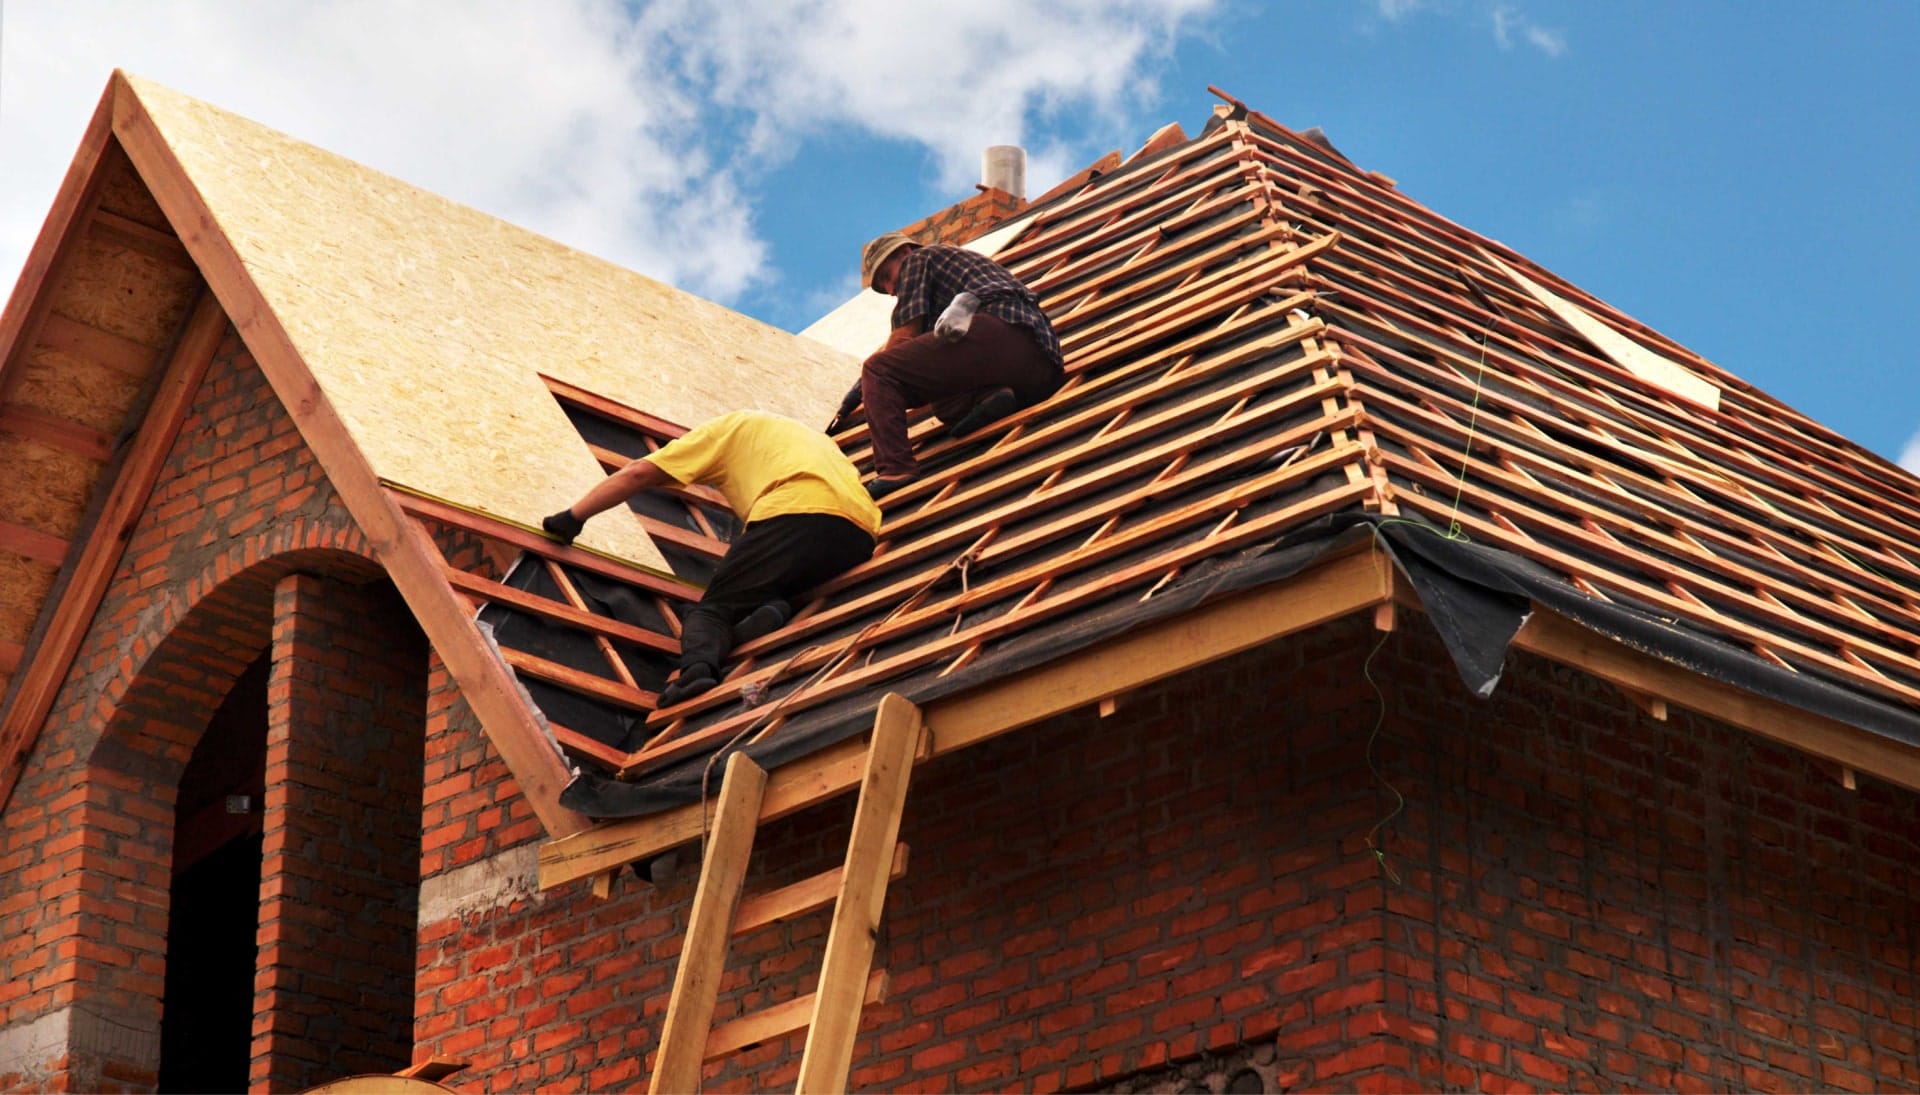 Trustworthy professional roofing services in Des Moines, Iowa with years of industry expertise.